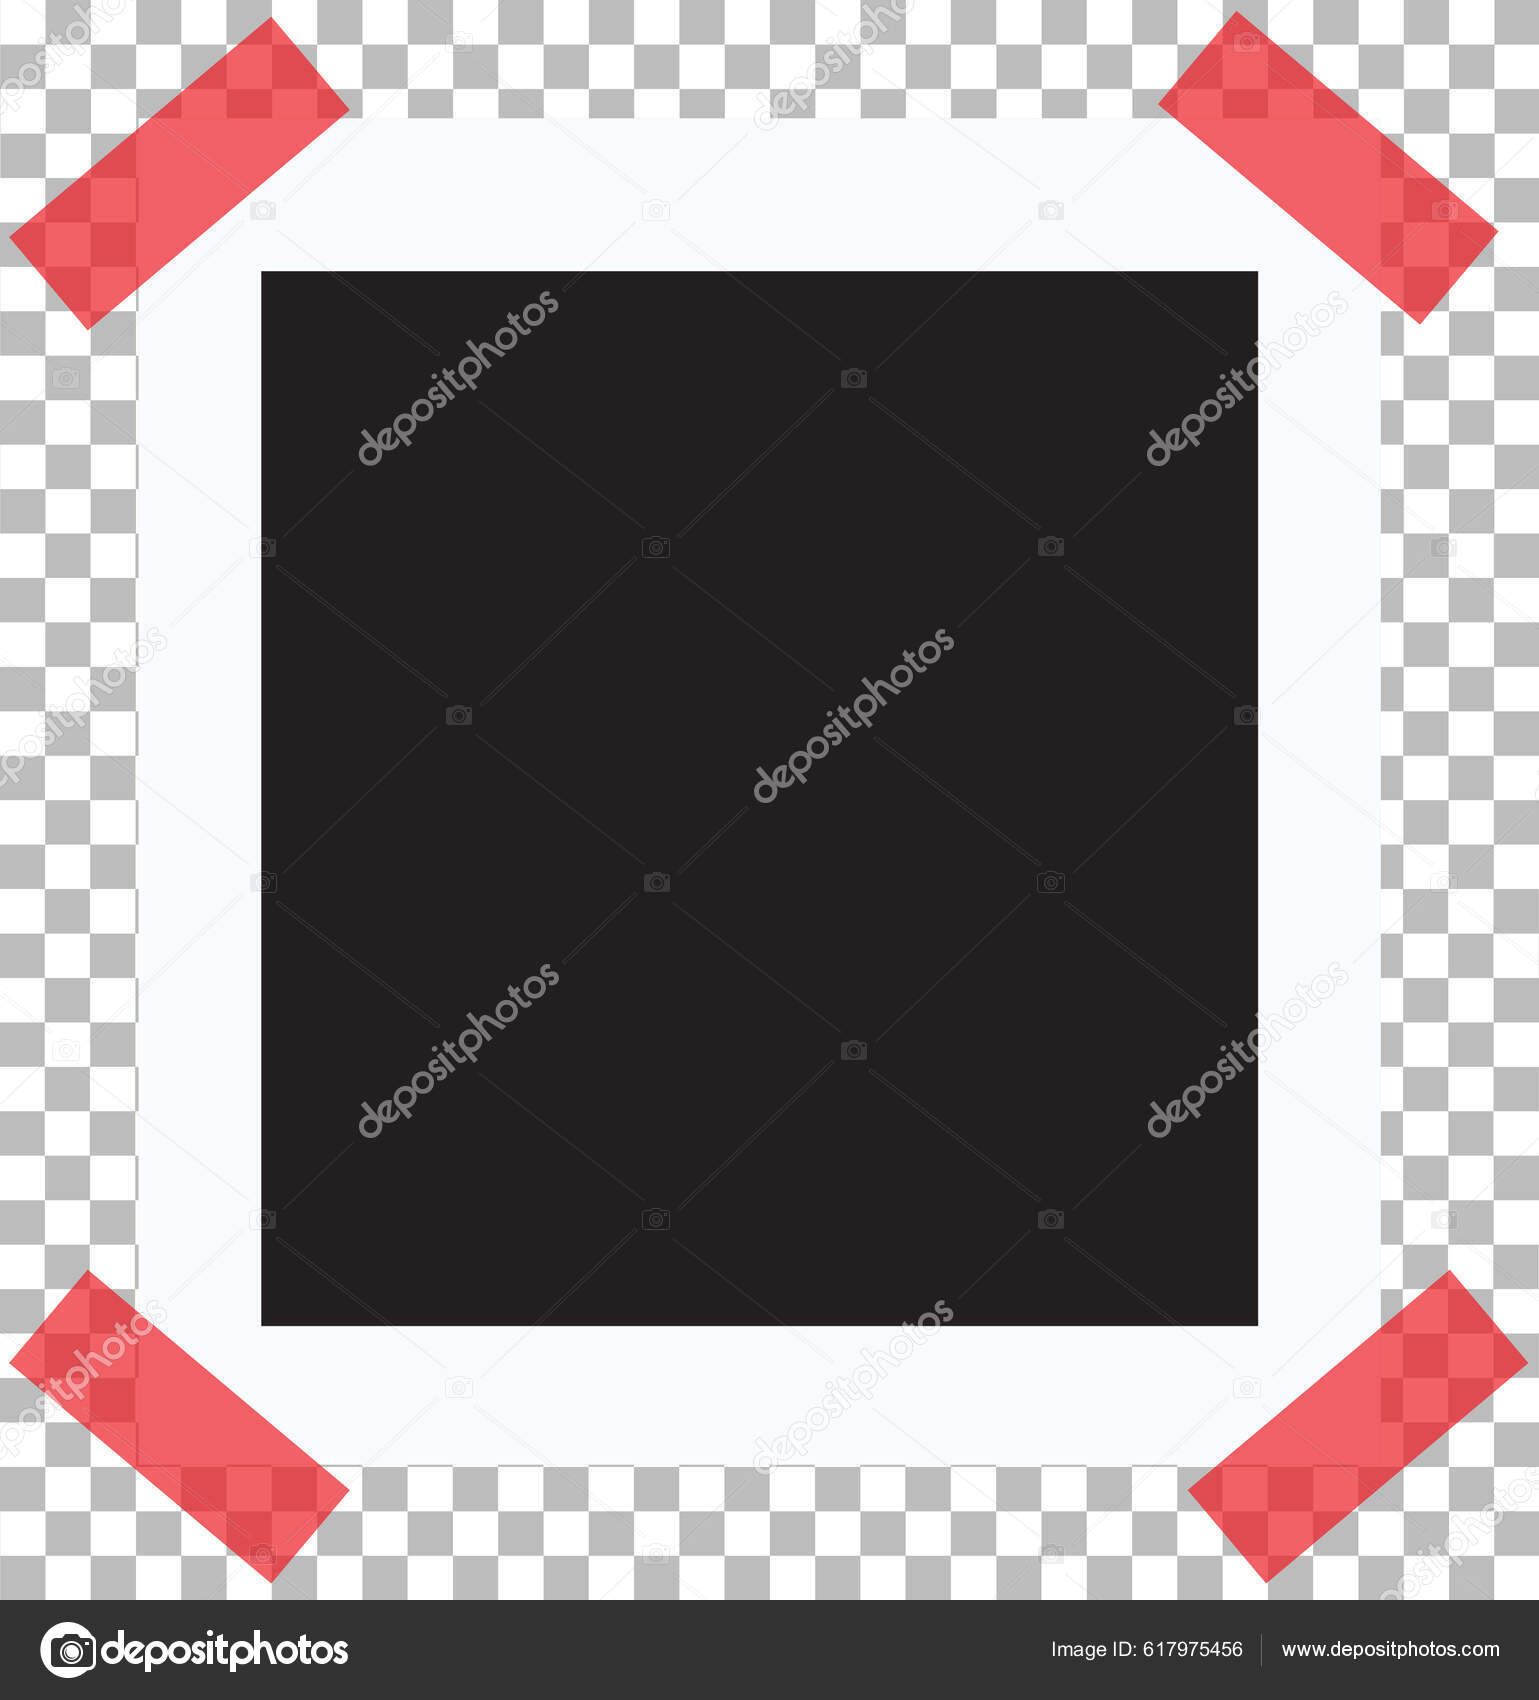 Sticky Tape Clipart Hd PNG, Rectangle Photo Frames With Sticky Tape, Photo  Clipart, Abstract, Album PNG Image For Free Download